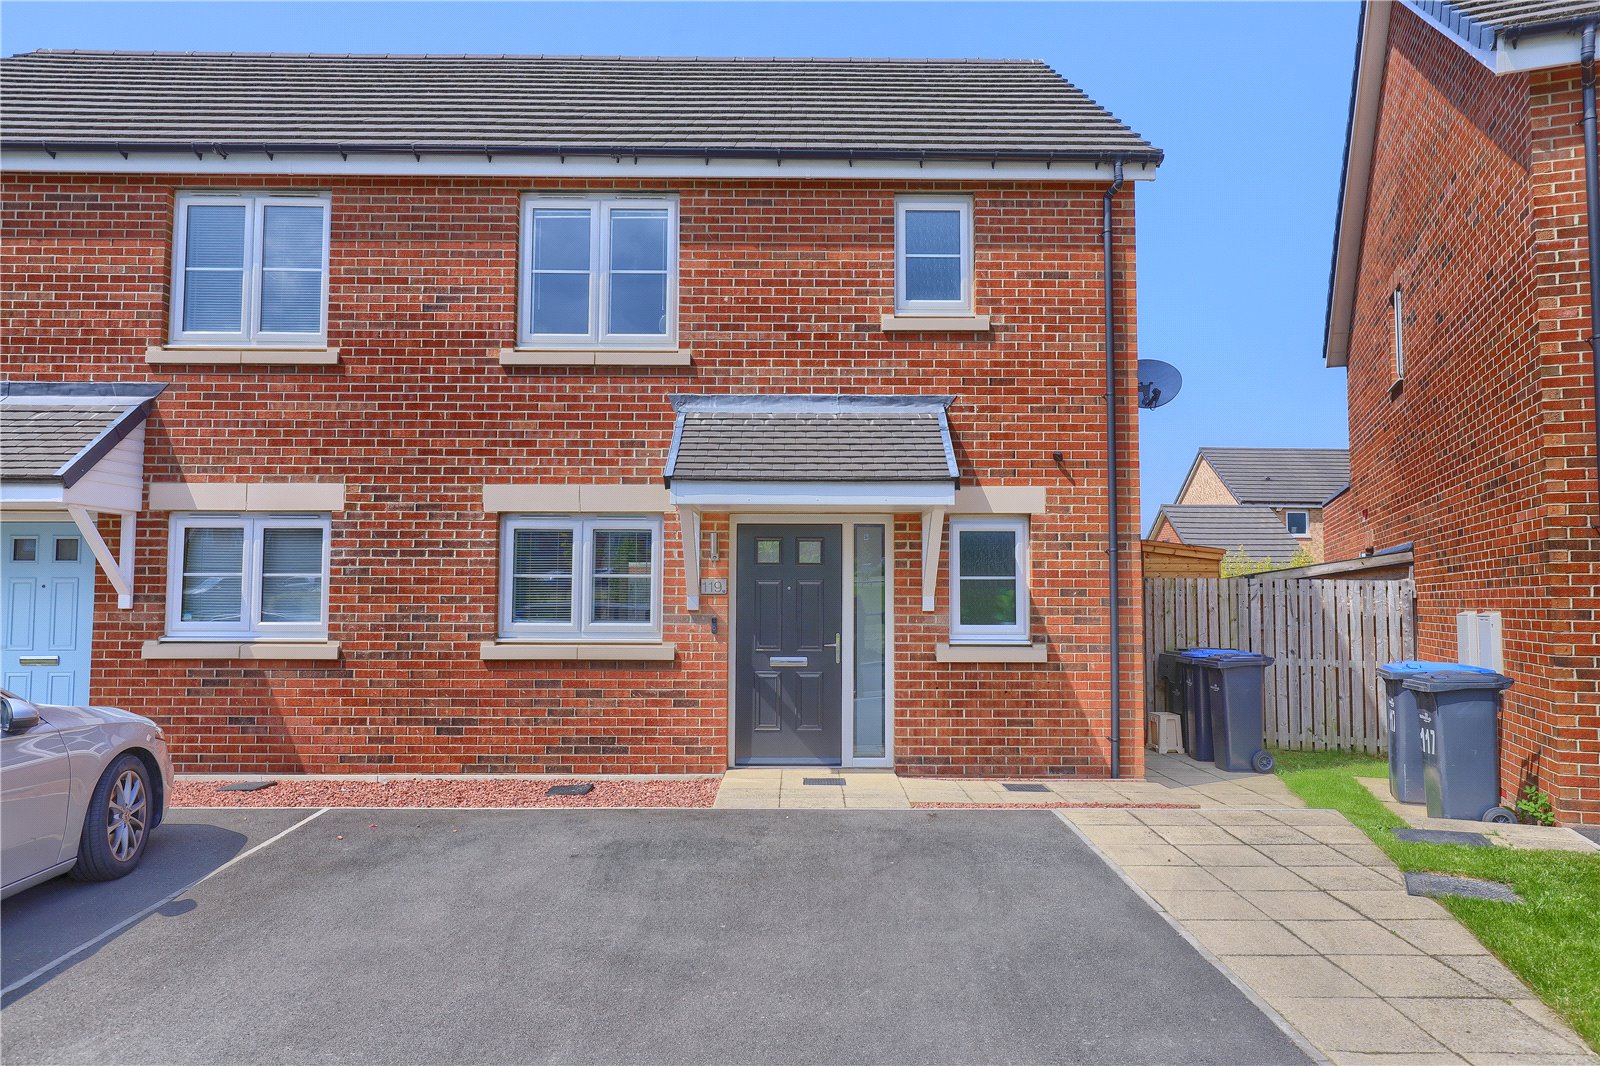 3 bed house for sale in Low Gill View, Middlesbrough - Property Image 1